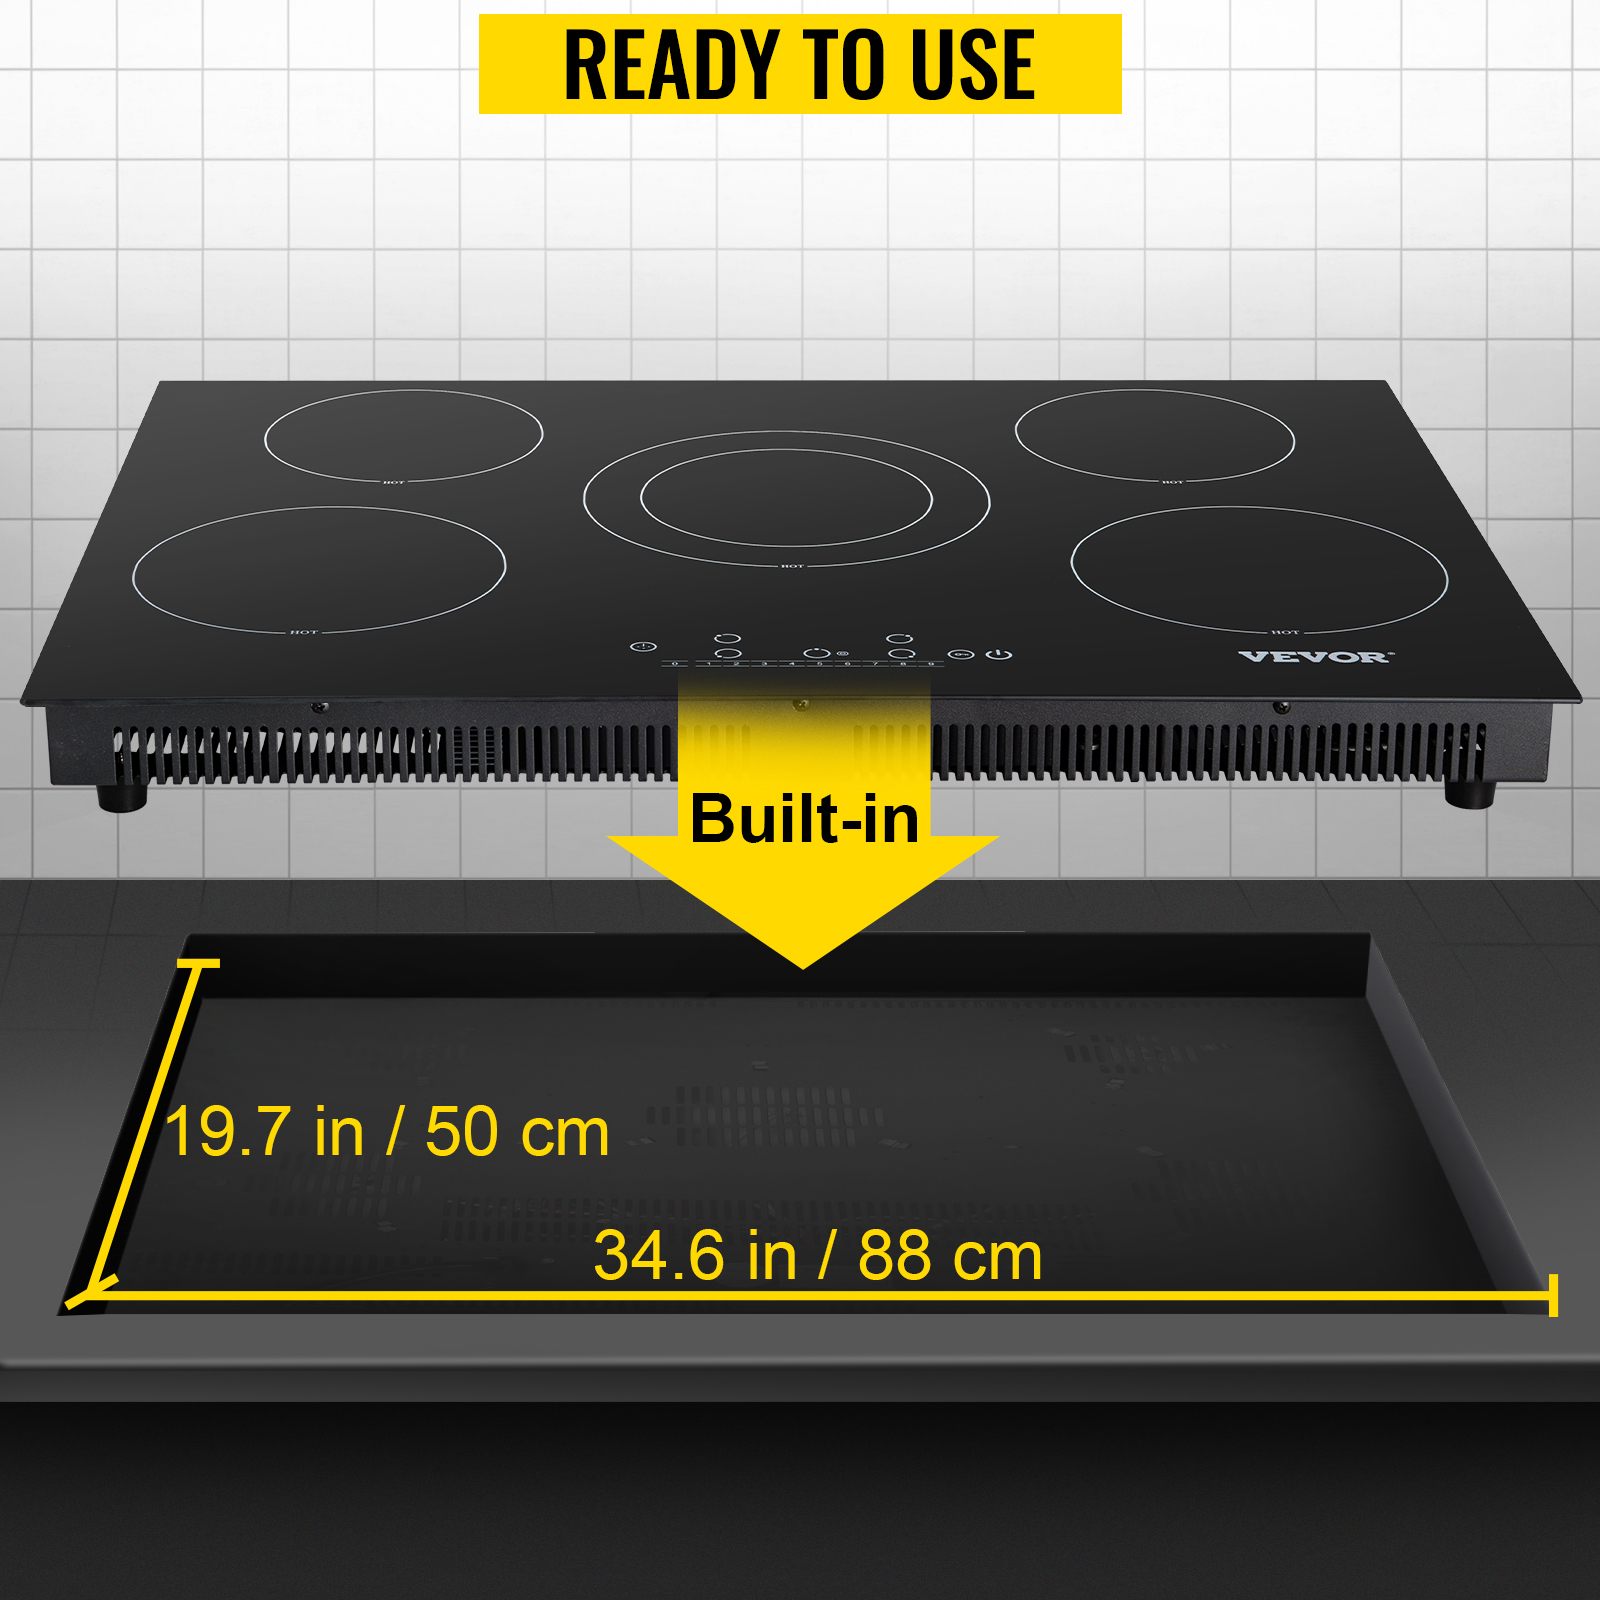 https://d2qc09rl1gfuof.cloudfront.net/product/QRSDTLY30220VN7WT/electric-cooktop-m100-6.jpg